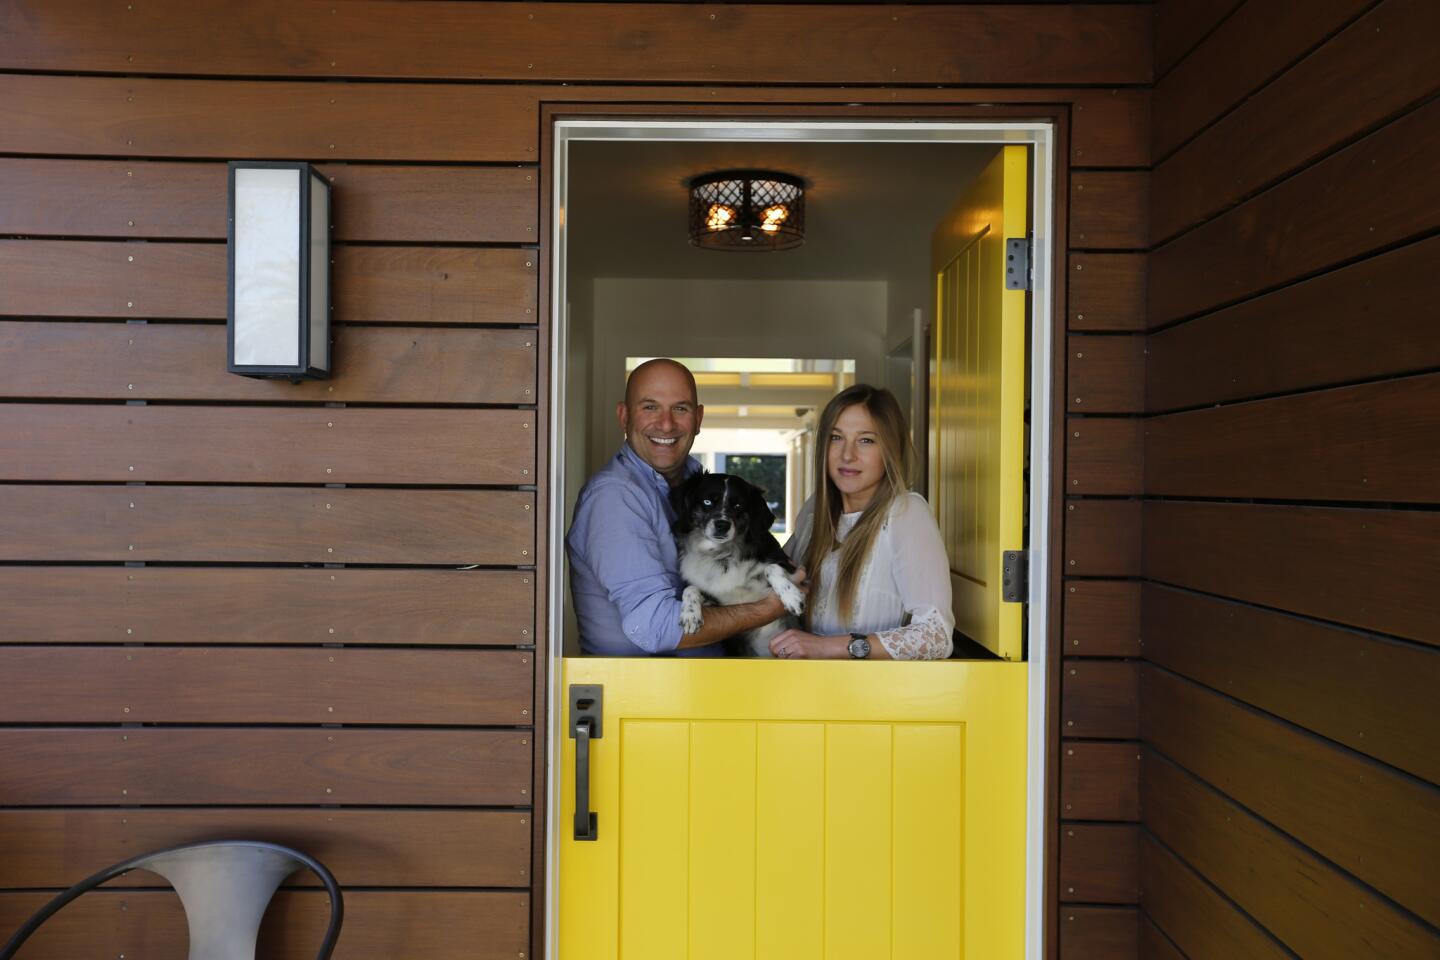 Drybar co-founder Michael Landau, his wife Sarah Hutnick and dog Samson at the entrance to their newly remodeled Costa Mesa ranch house.